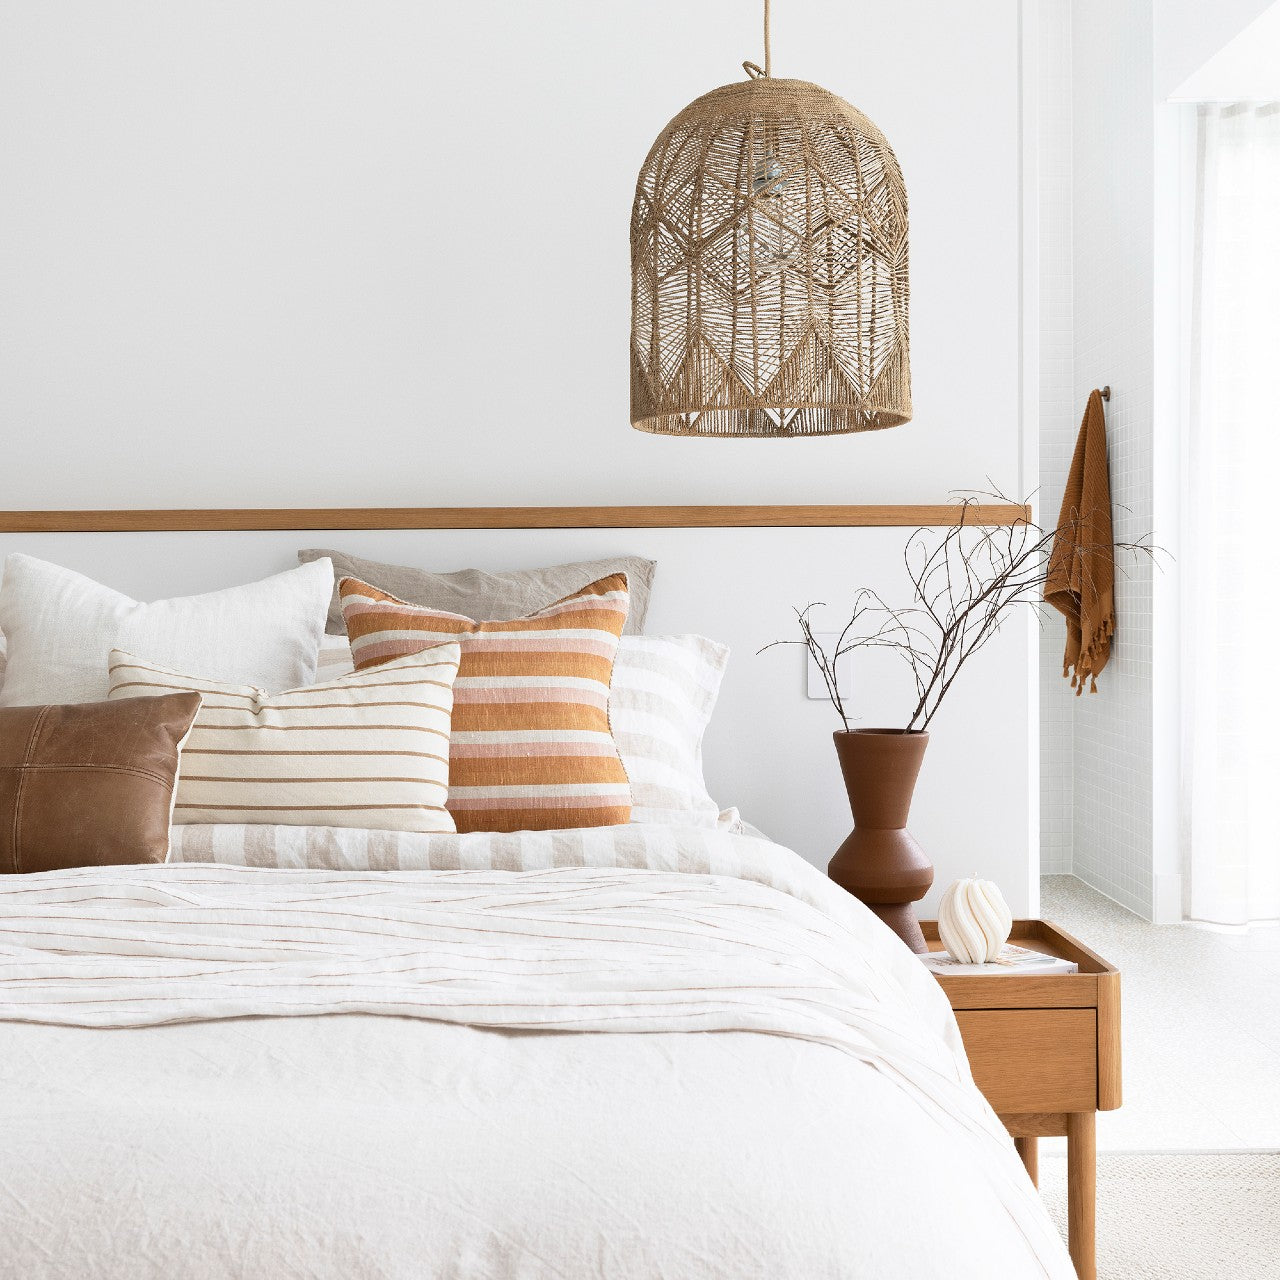 seagrass pendant light in natural colour used as a bedise pendant over a gorgeous bed made with natural linen doona cover and sheets and terracotta and beige coloured cushions.